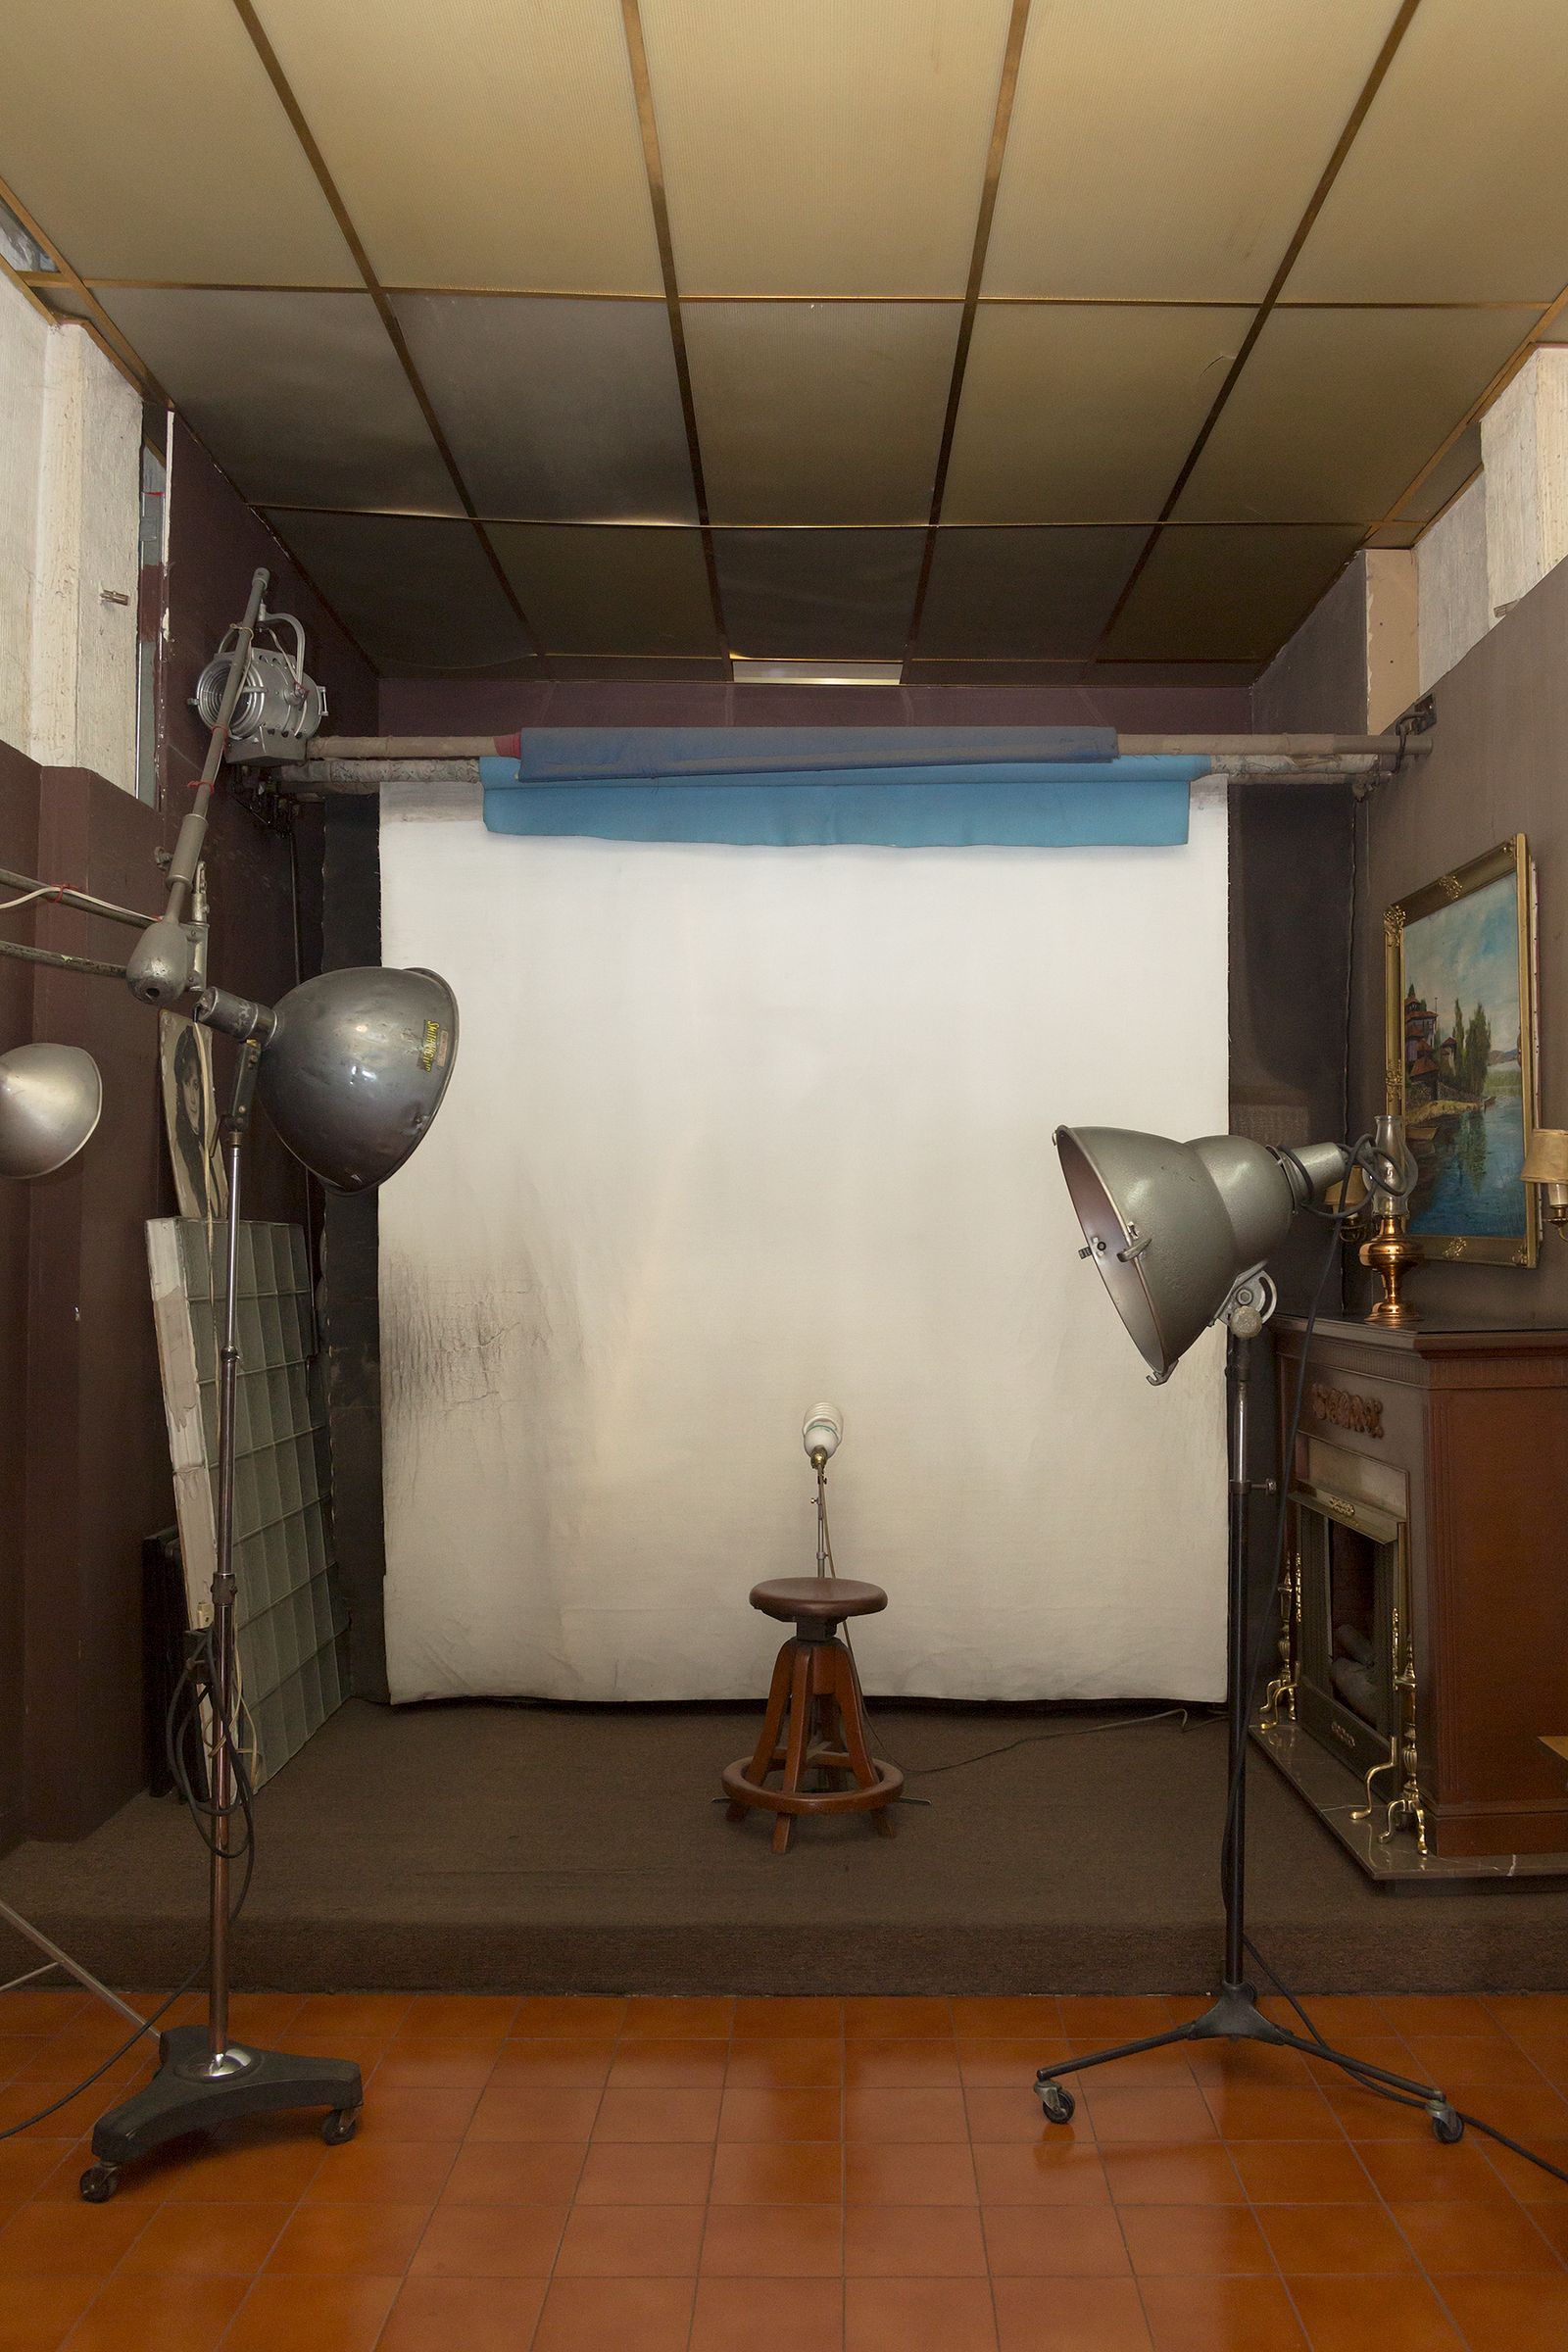 © Melba Arellano - Foto Regalos is the oldest photographic studio in the north part of Mexico City.